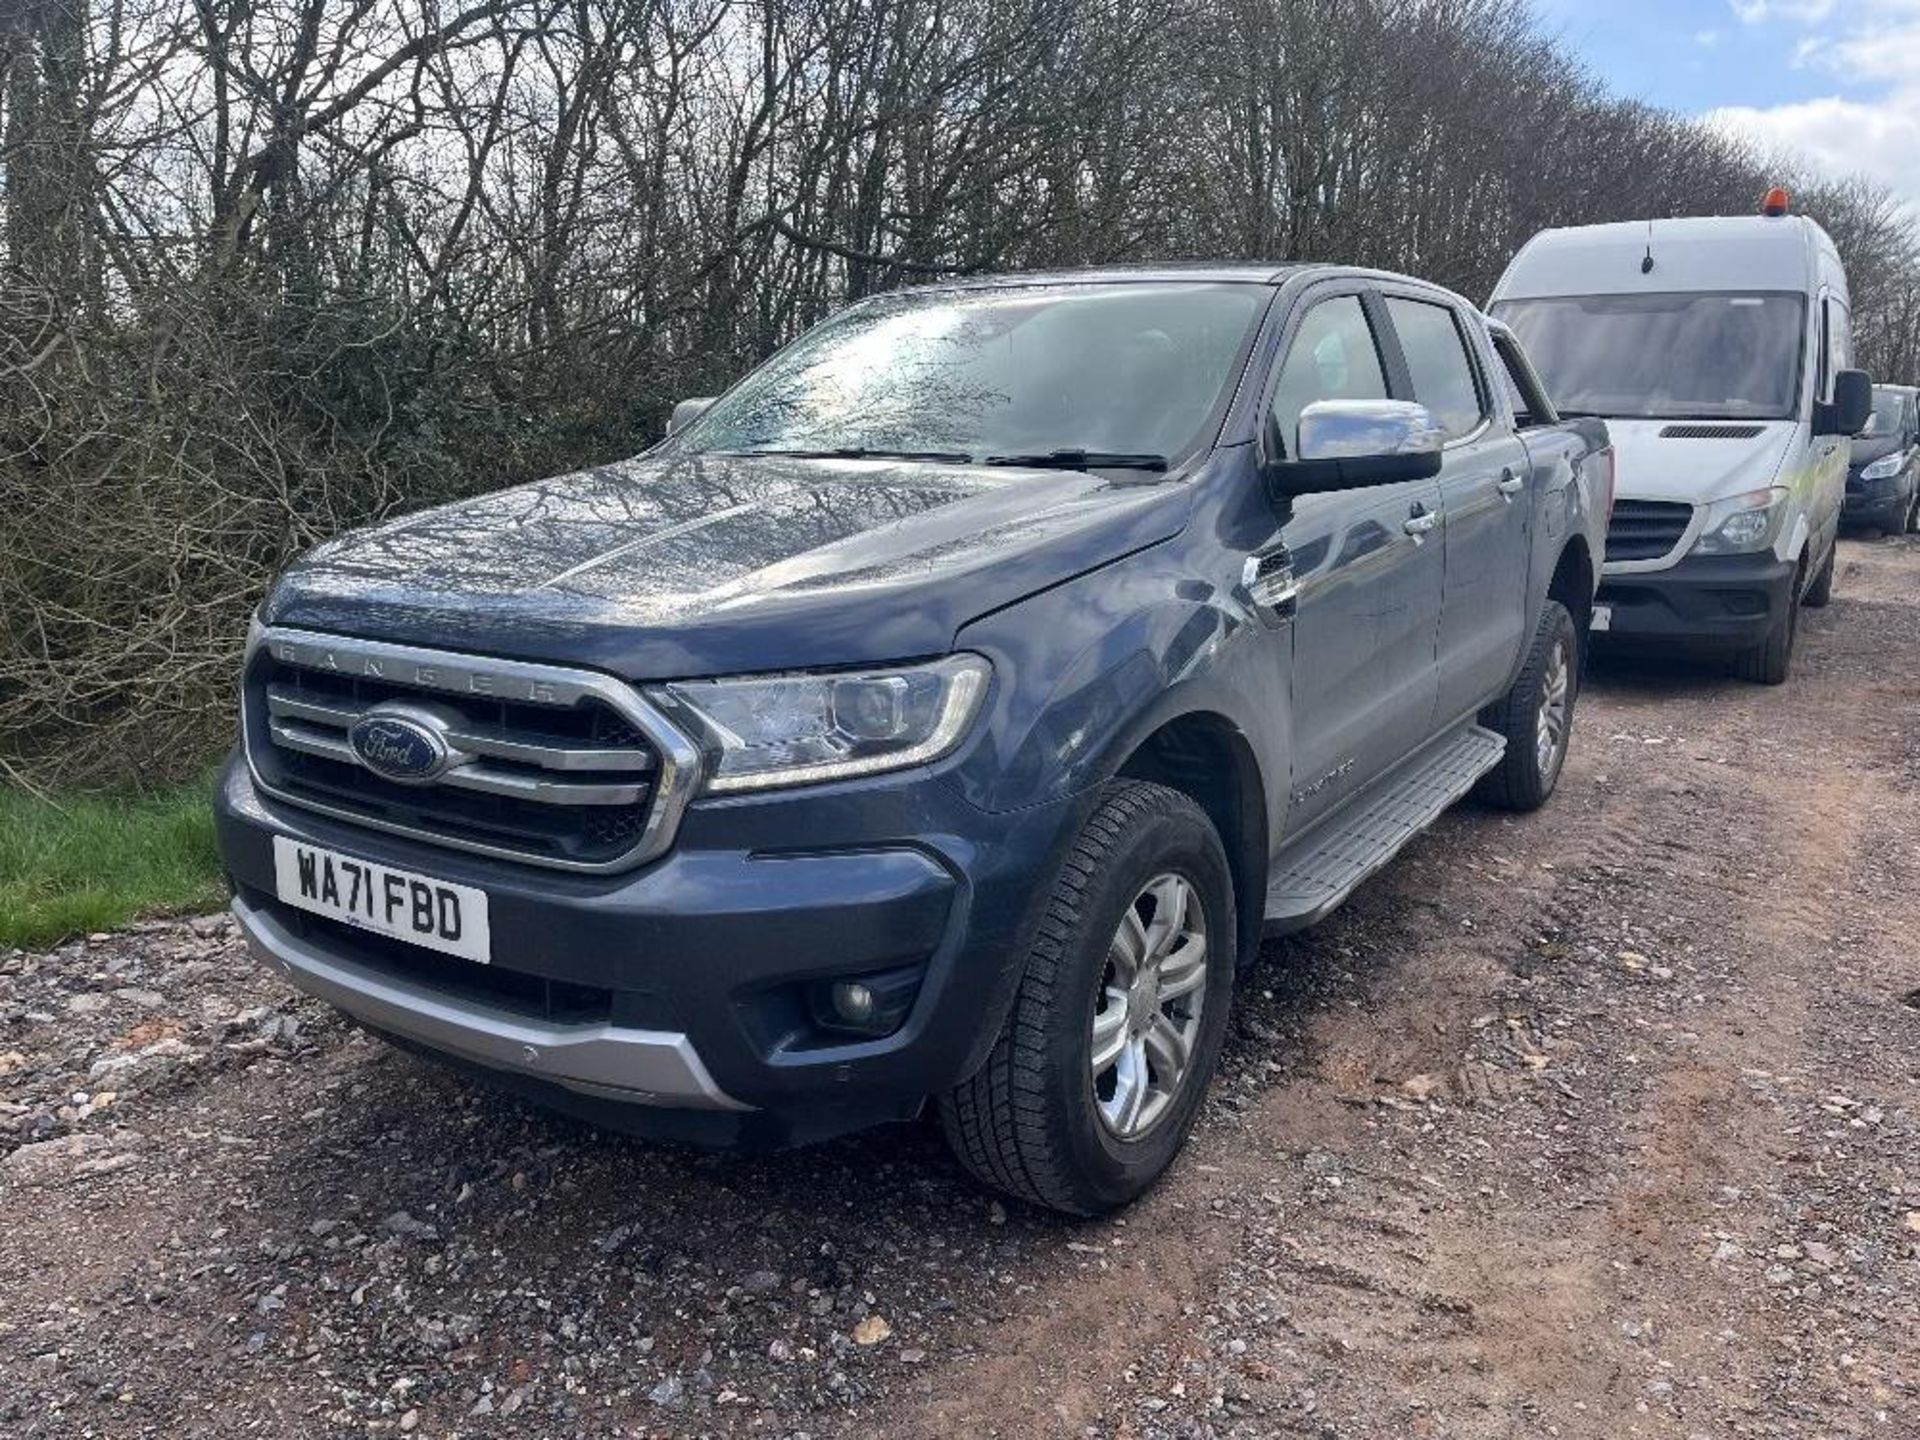 Ford Ranger Limited EcoBlue WA71 FBD - Image 2 of 17